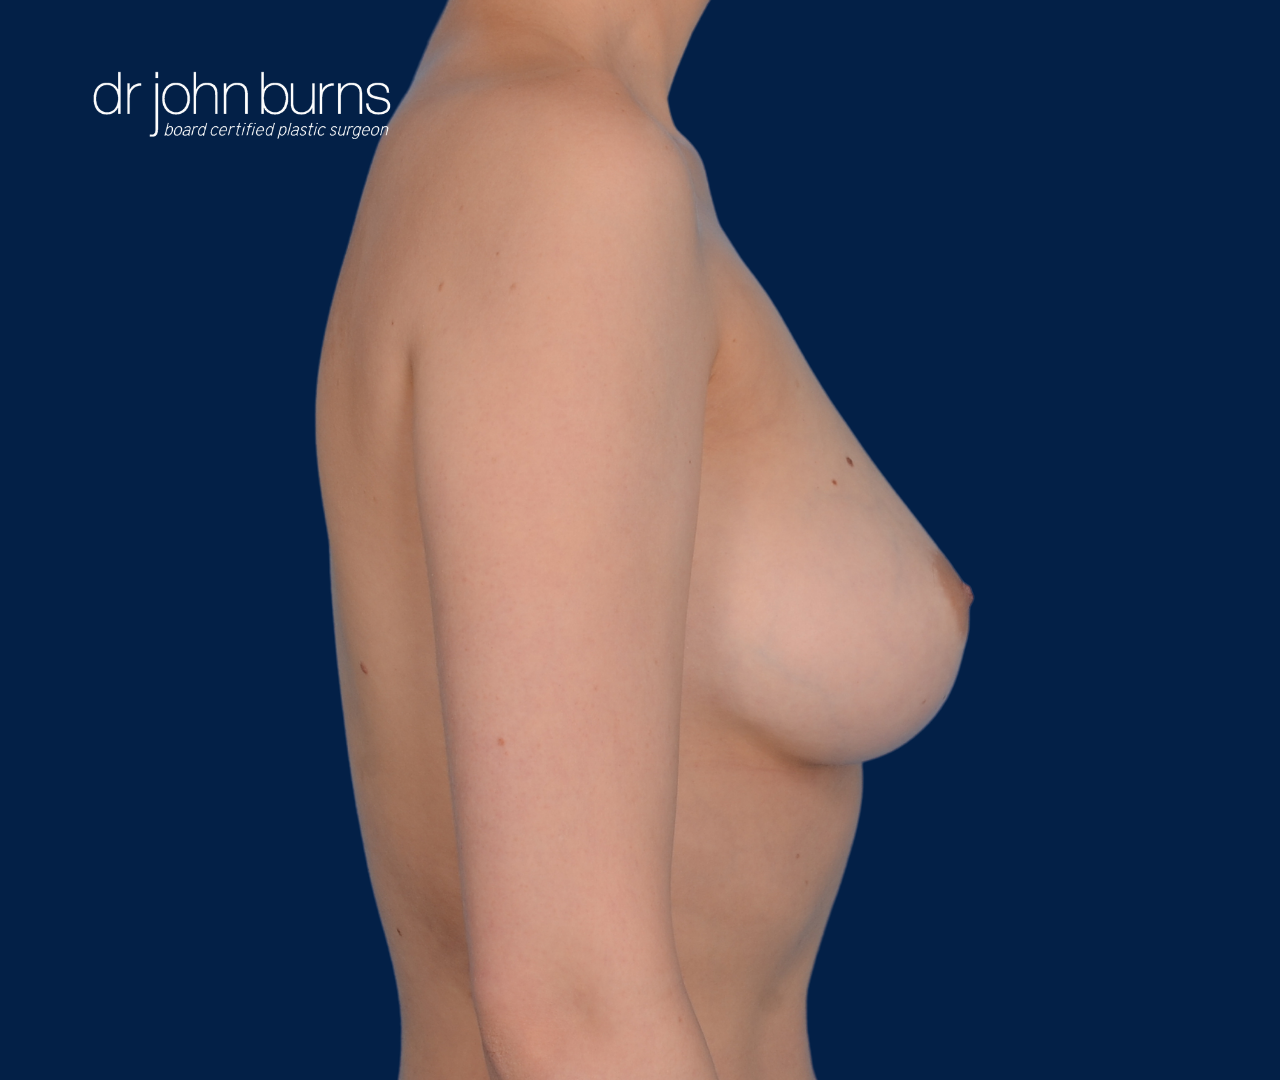 case 14- profile view | after fat transfer to breast by top plastic surgeon, Dr. John Burns